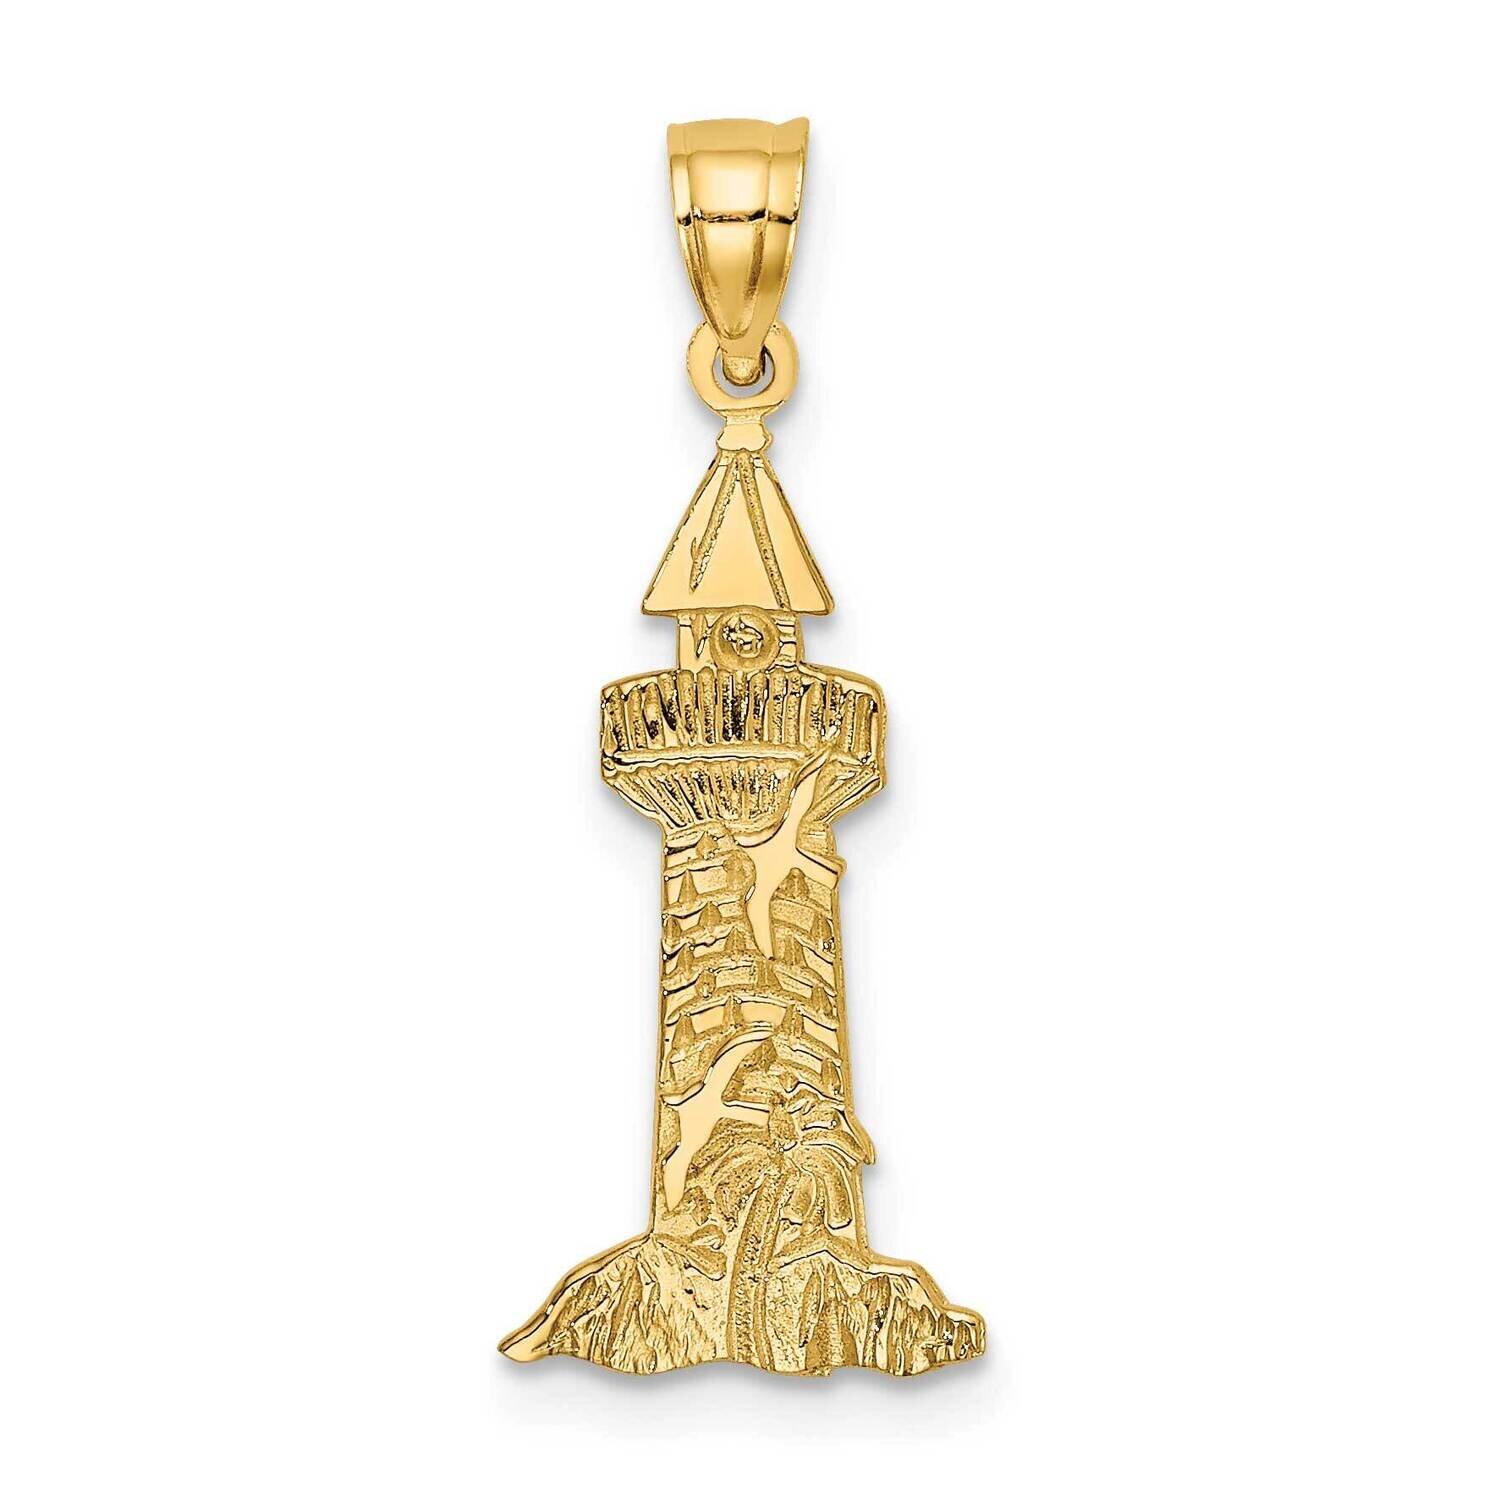 Lighthouse with Seagulls Charm 14k Gold K7374